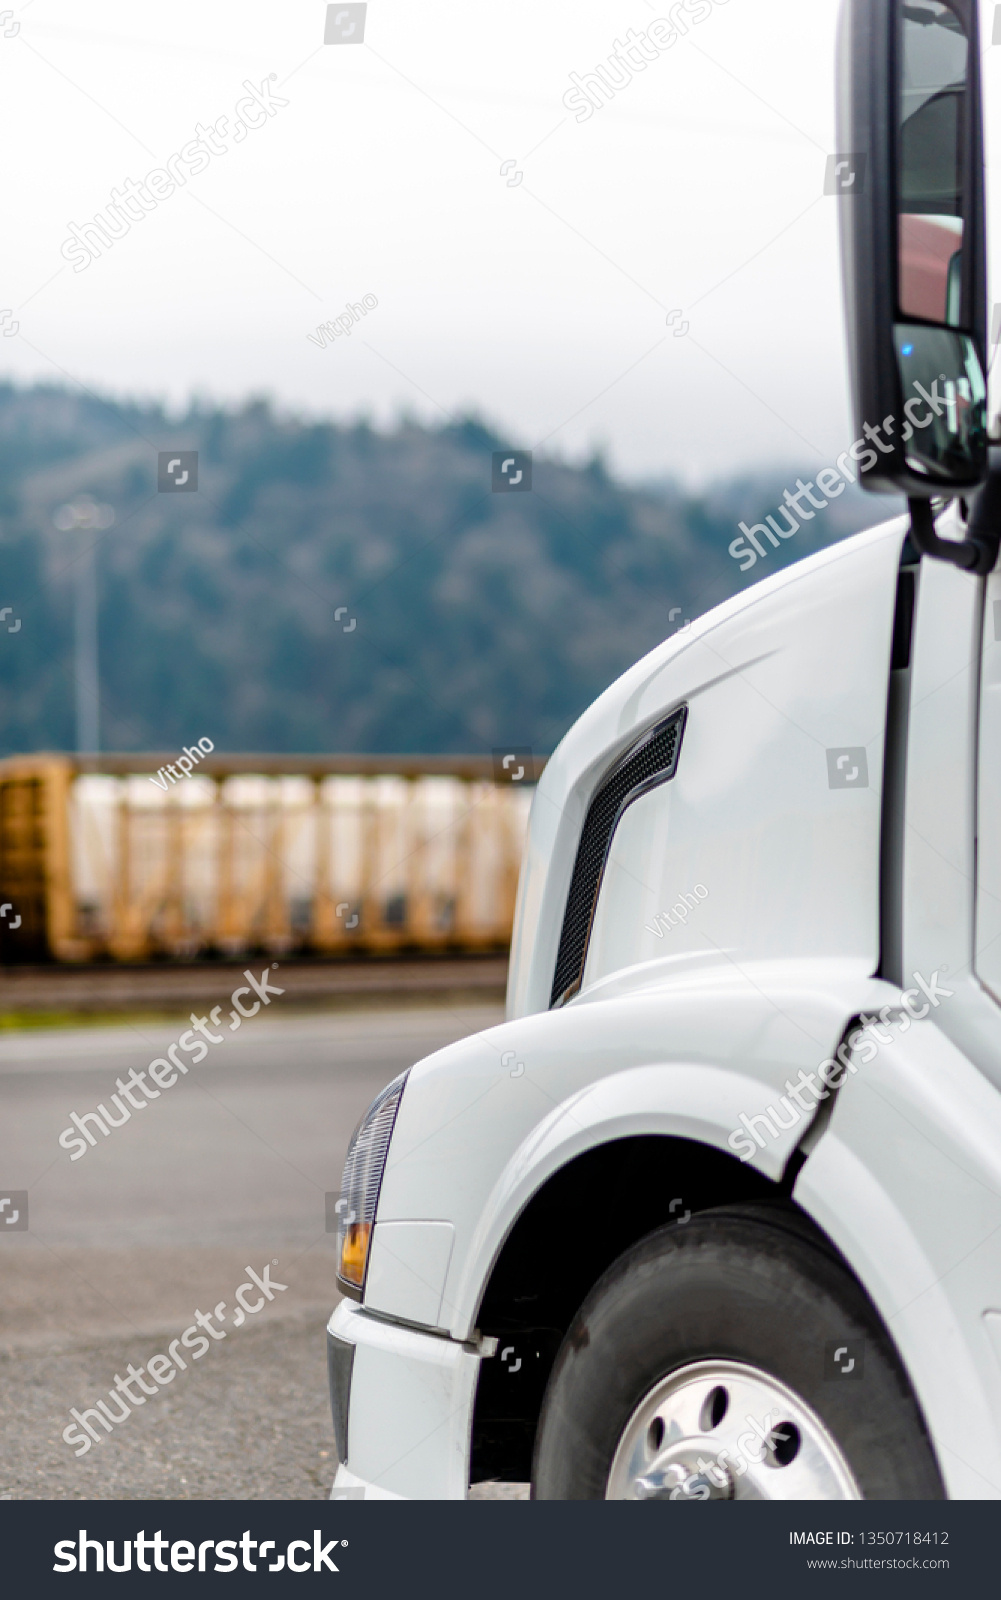 The front of professional industrial grade cab and hood of modern big rig white clean semi truck with front wheel parked on parking lot near the warehouse waiting commercial cargo load for delivery #1350718412